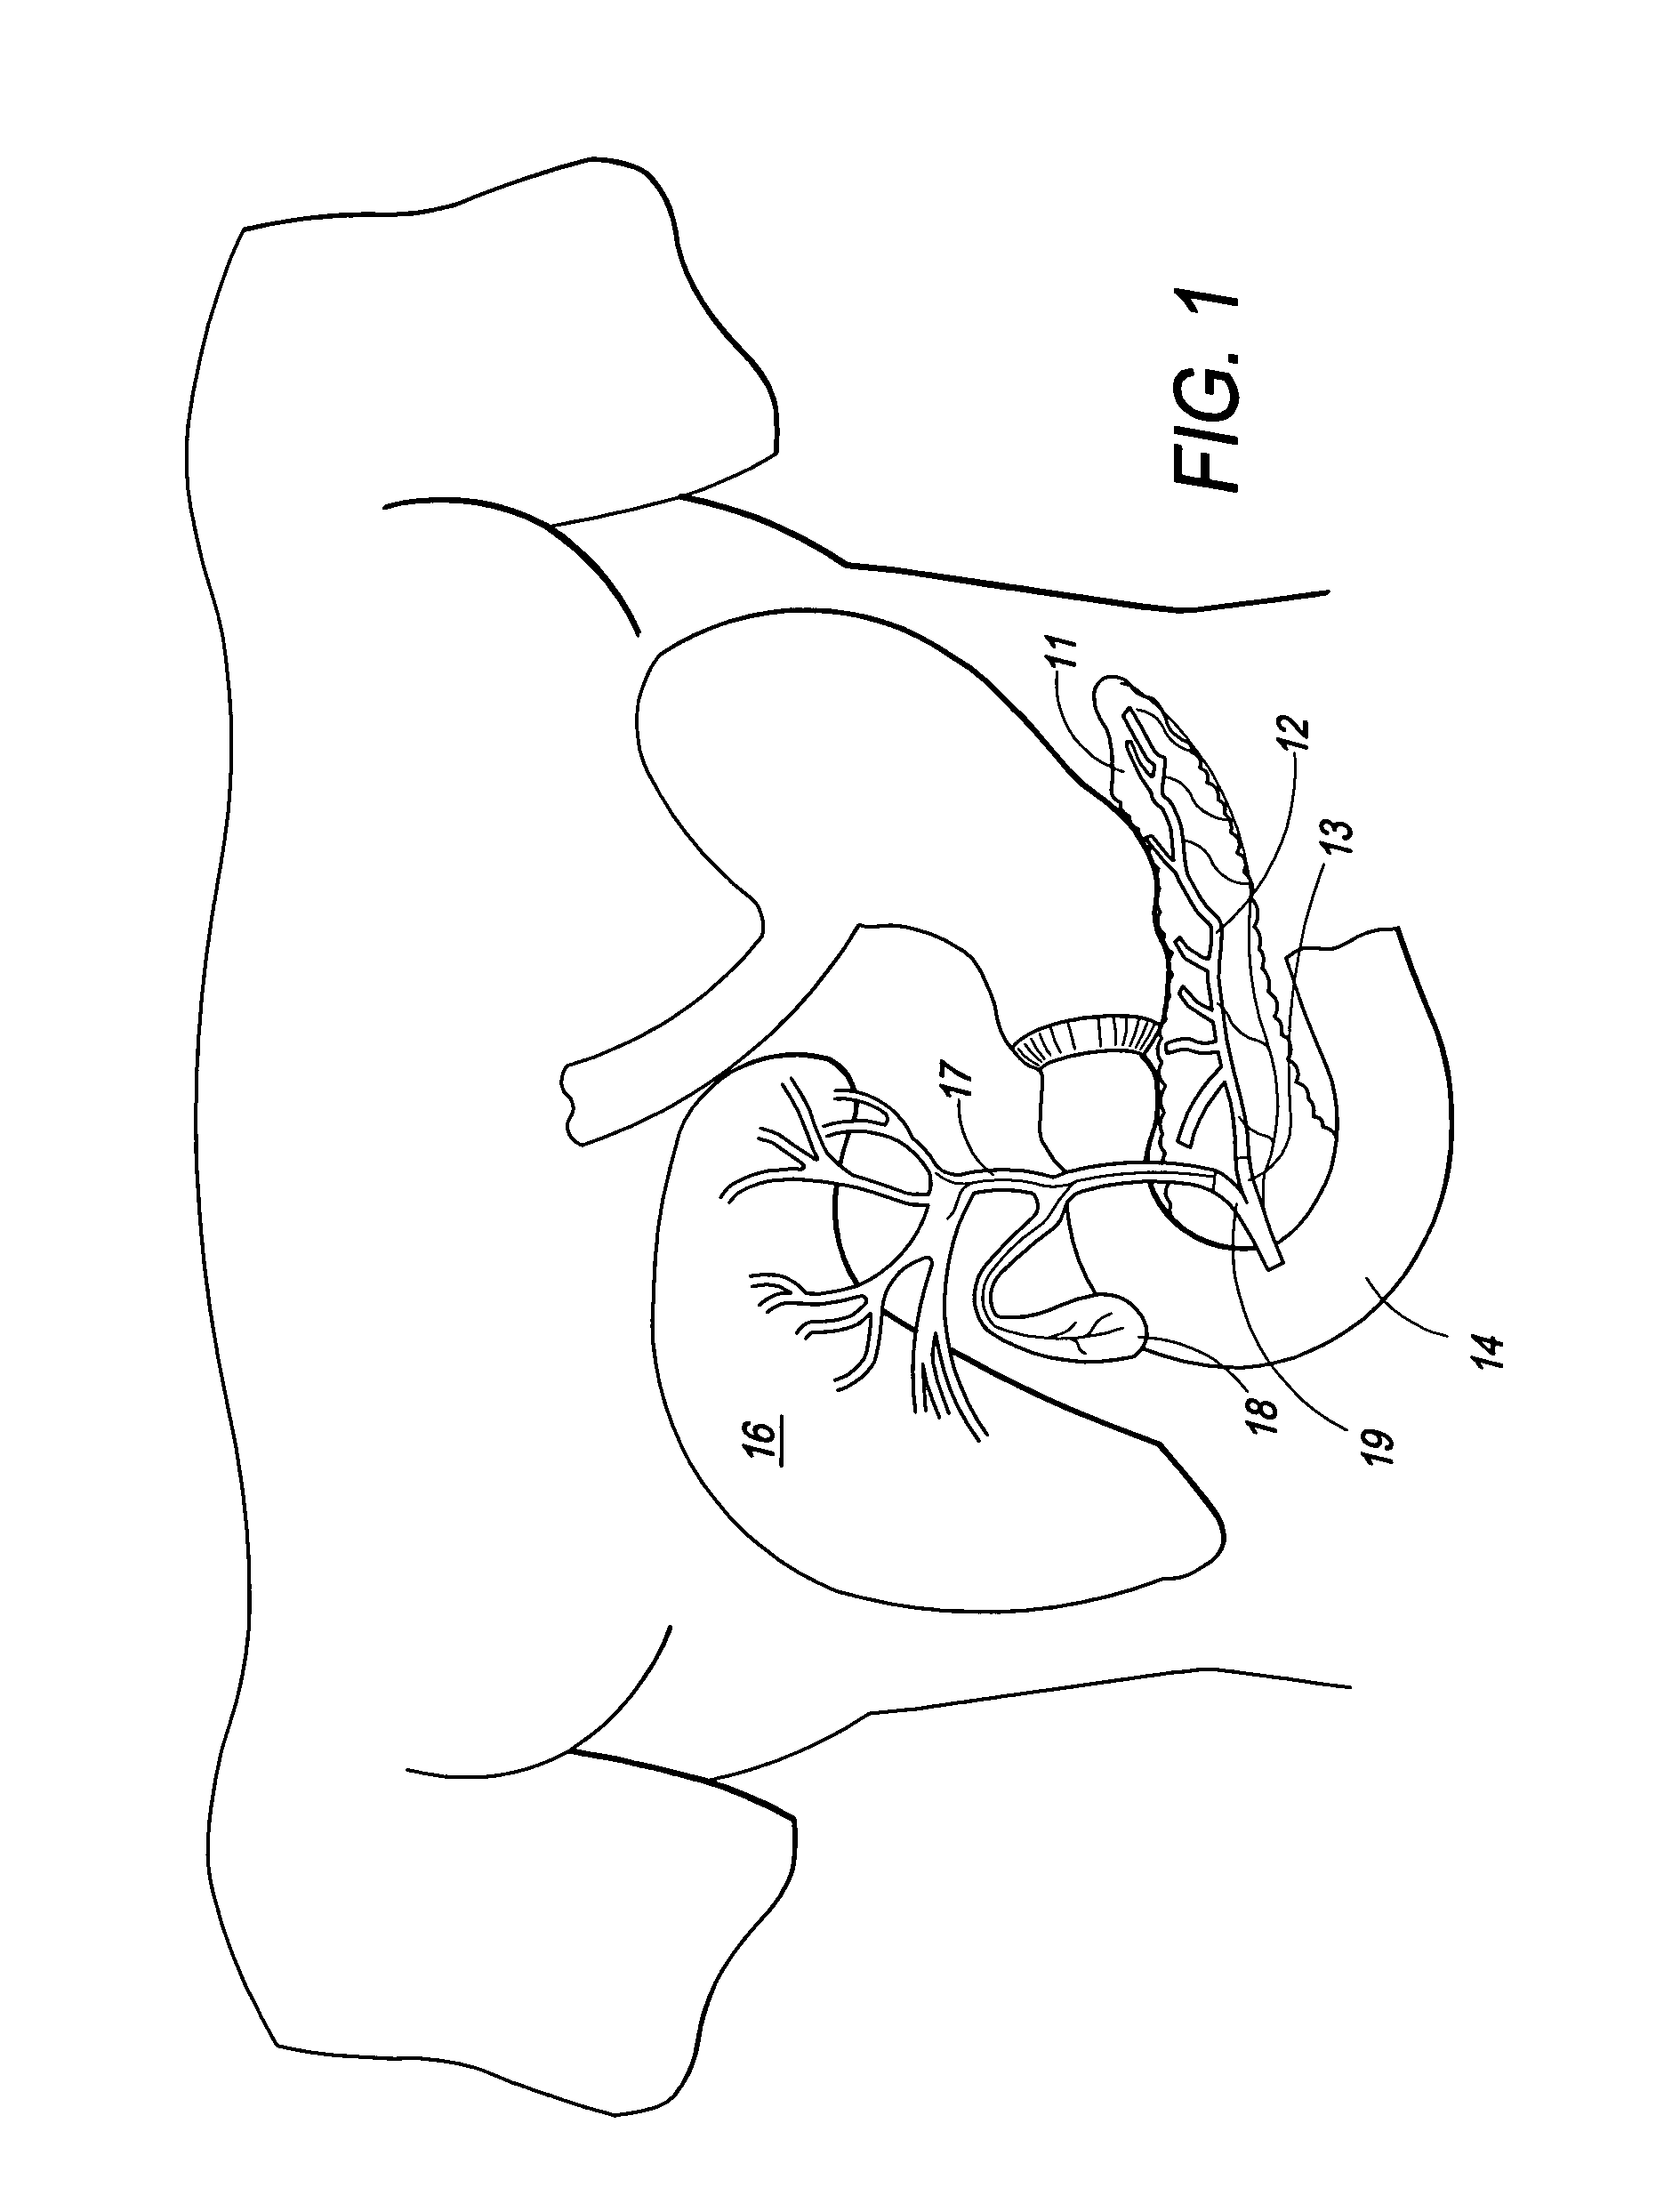 Method and Apparatus for Electrical Stimulation of the Pancreatico-Biliary System